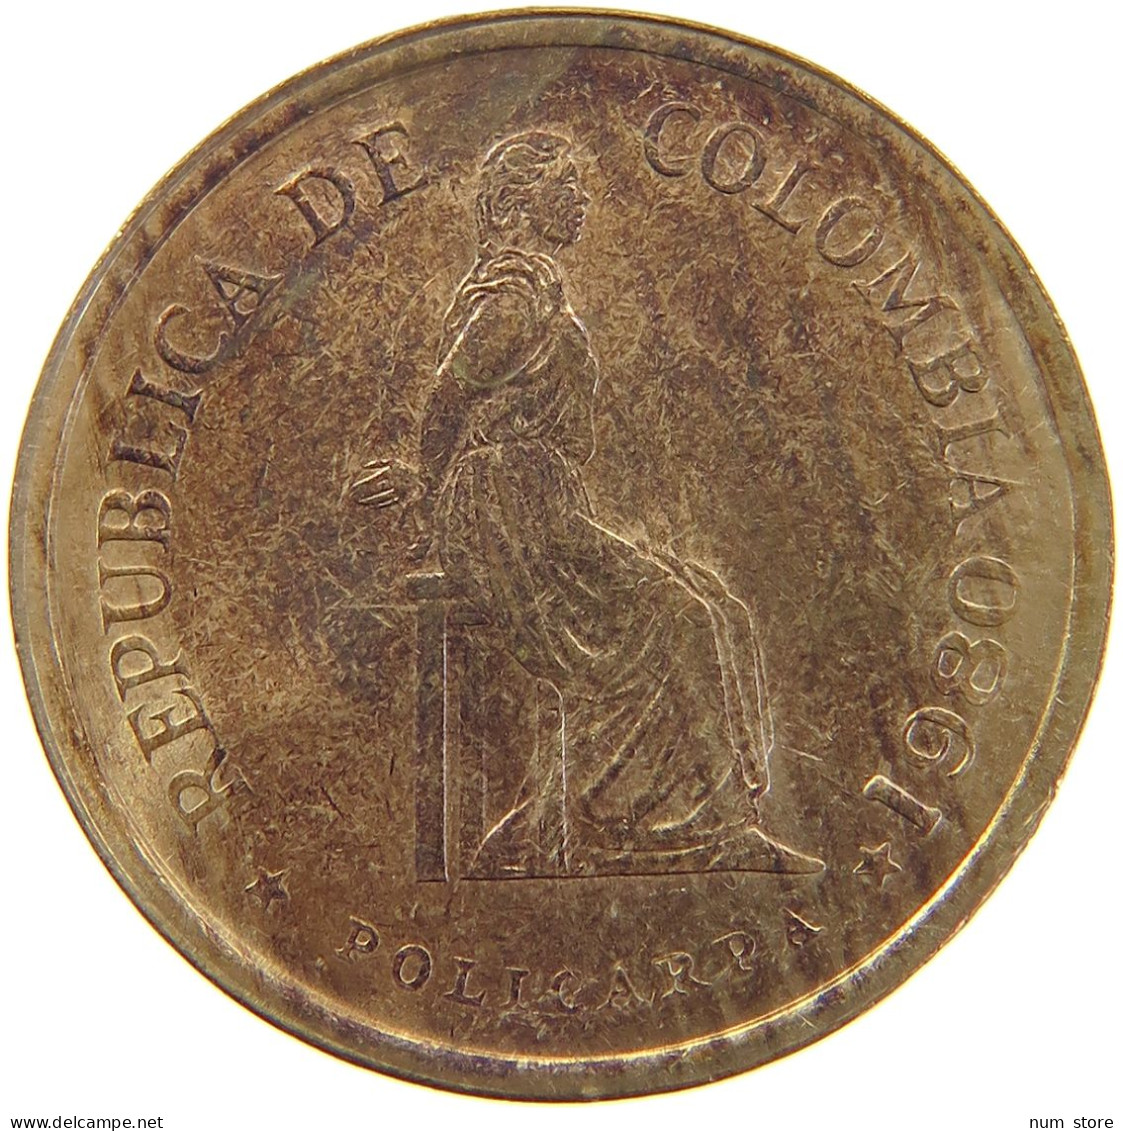 COLOMBIA 5 PESOS 1980 #s092 0019 - Colombia